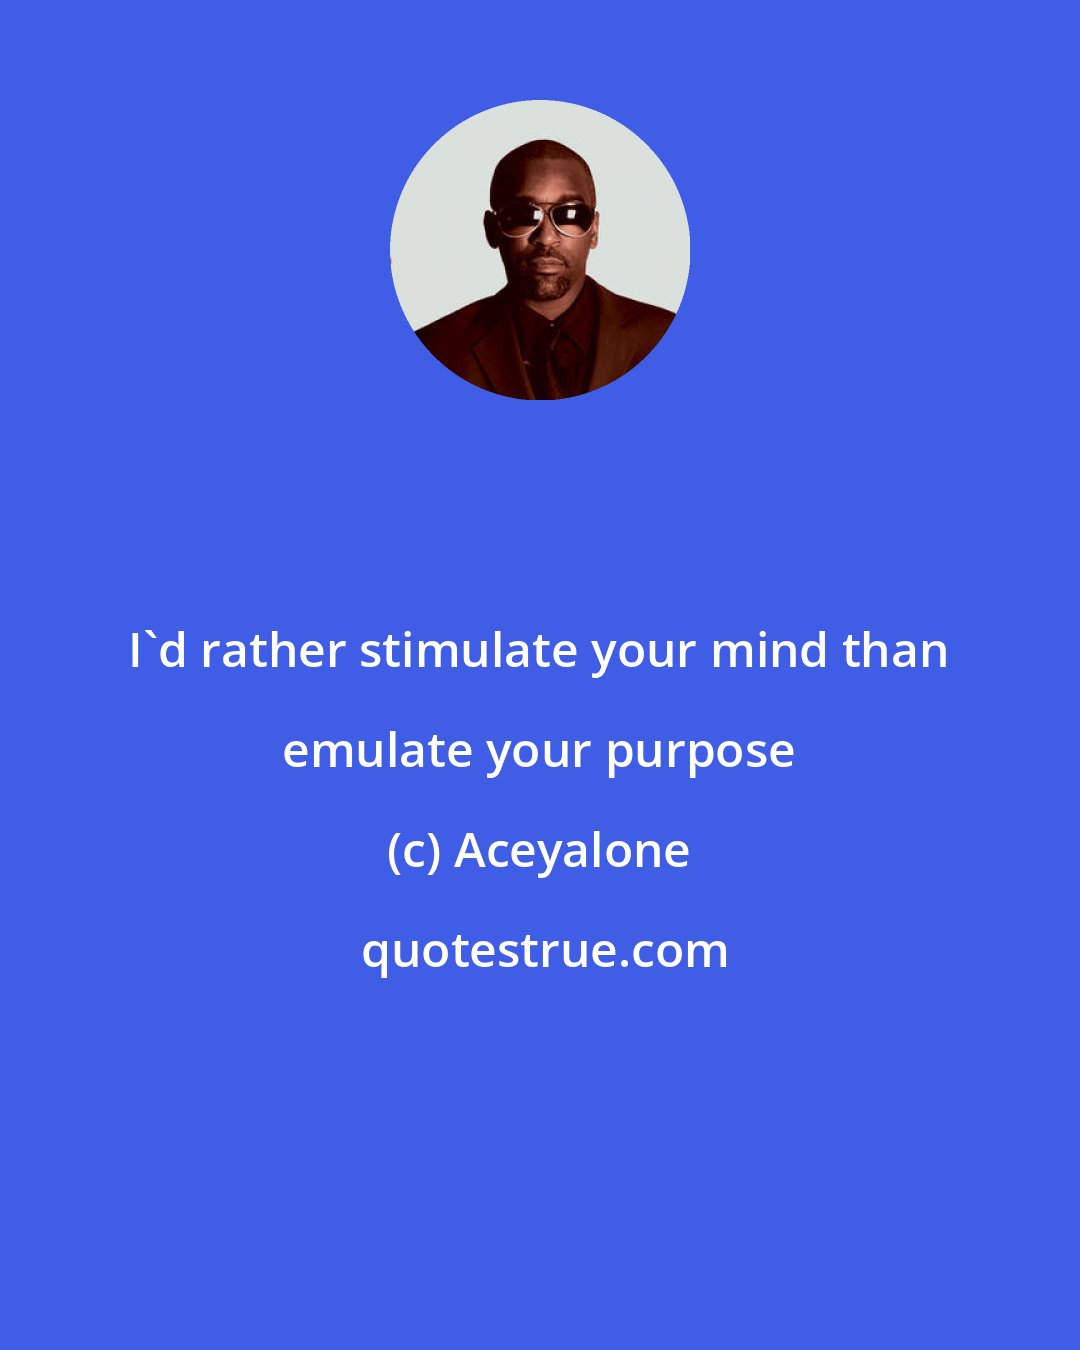 Aceyalone: I'd rather stimulate your mind than emulate your purpose